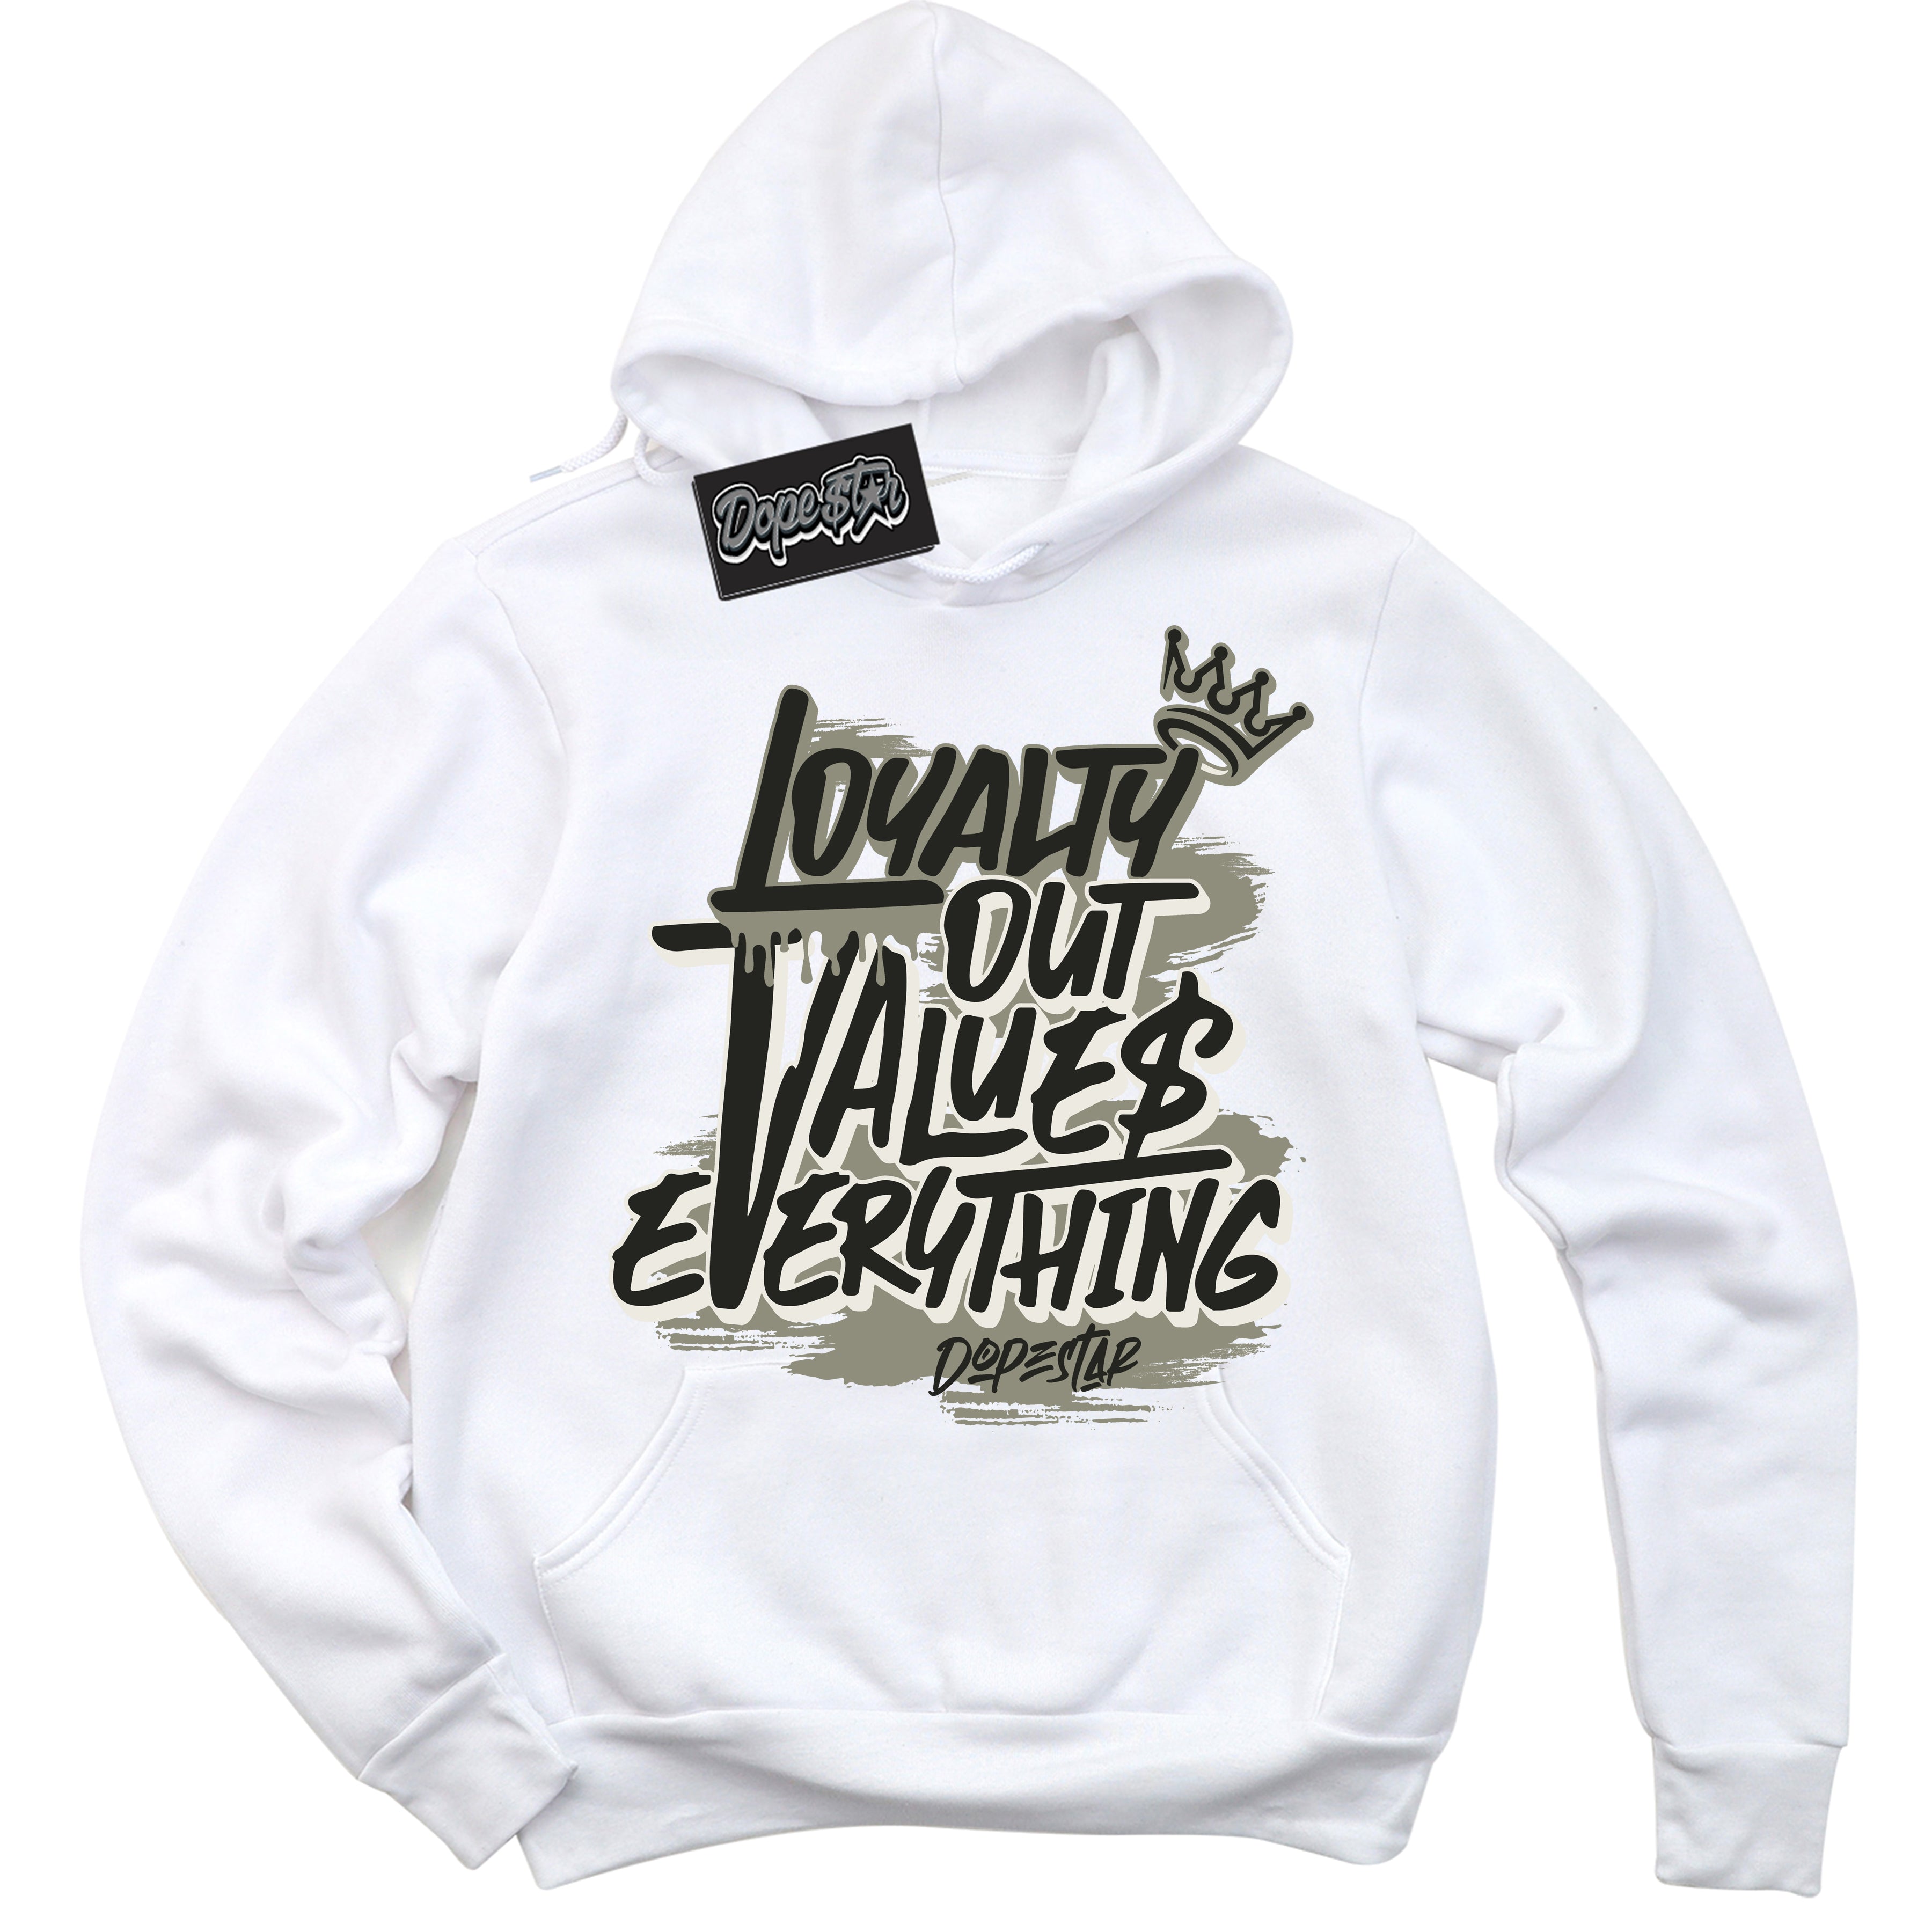 Cool White Hoodie with “ Loyalty Out Values Everything ”  design that Perfectly Matches AJKO Shadow 1s Sneakers.